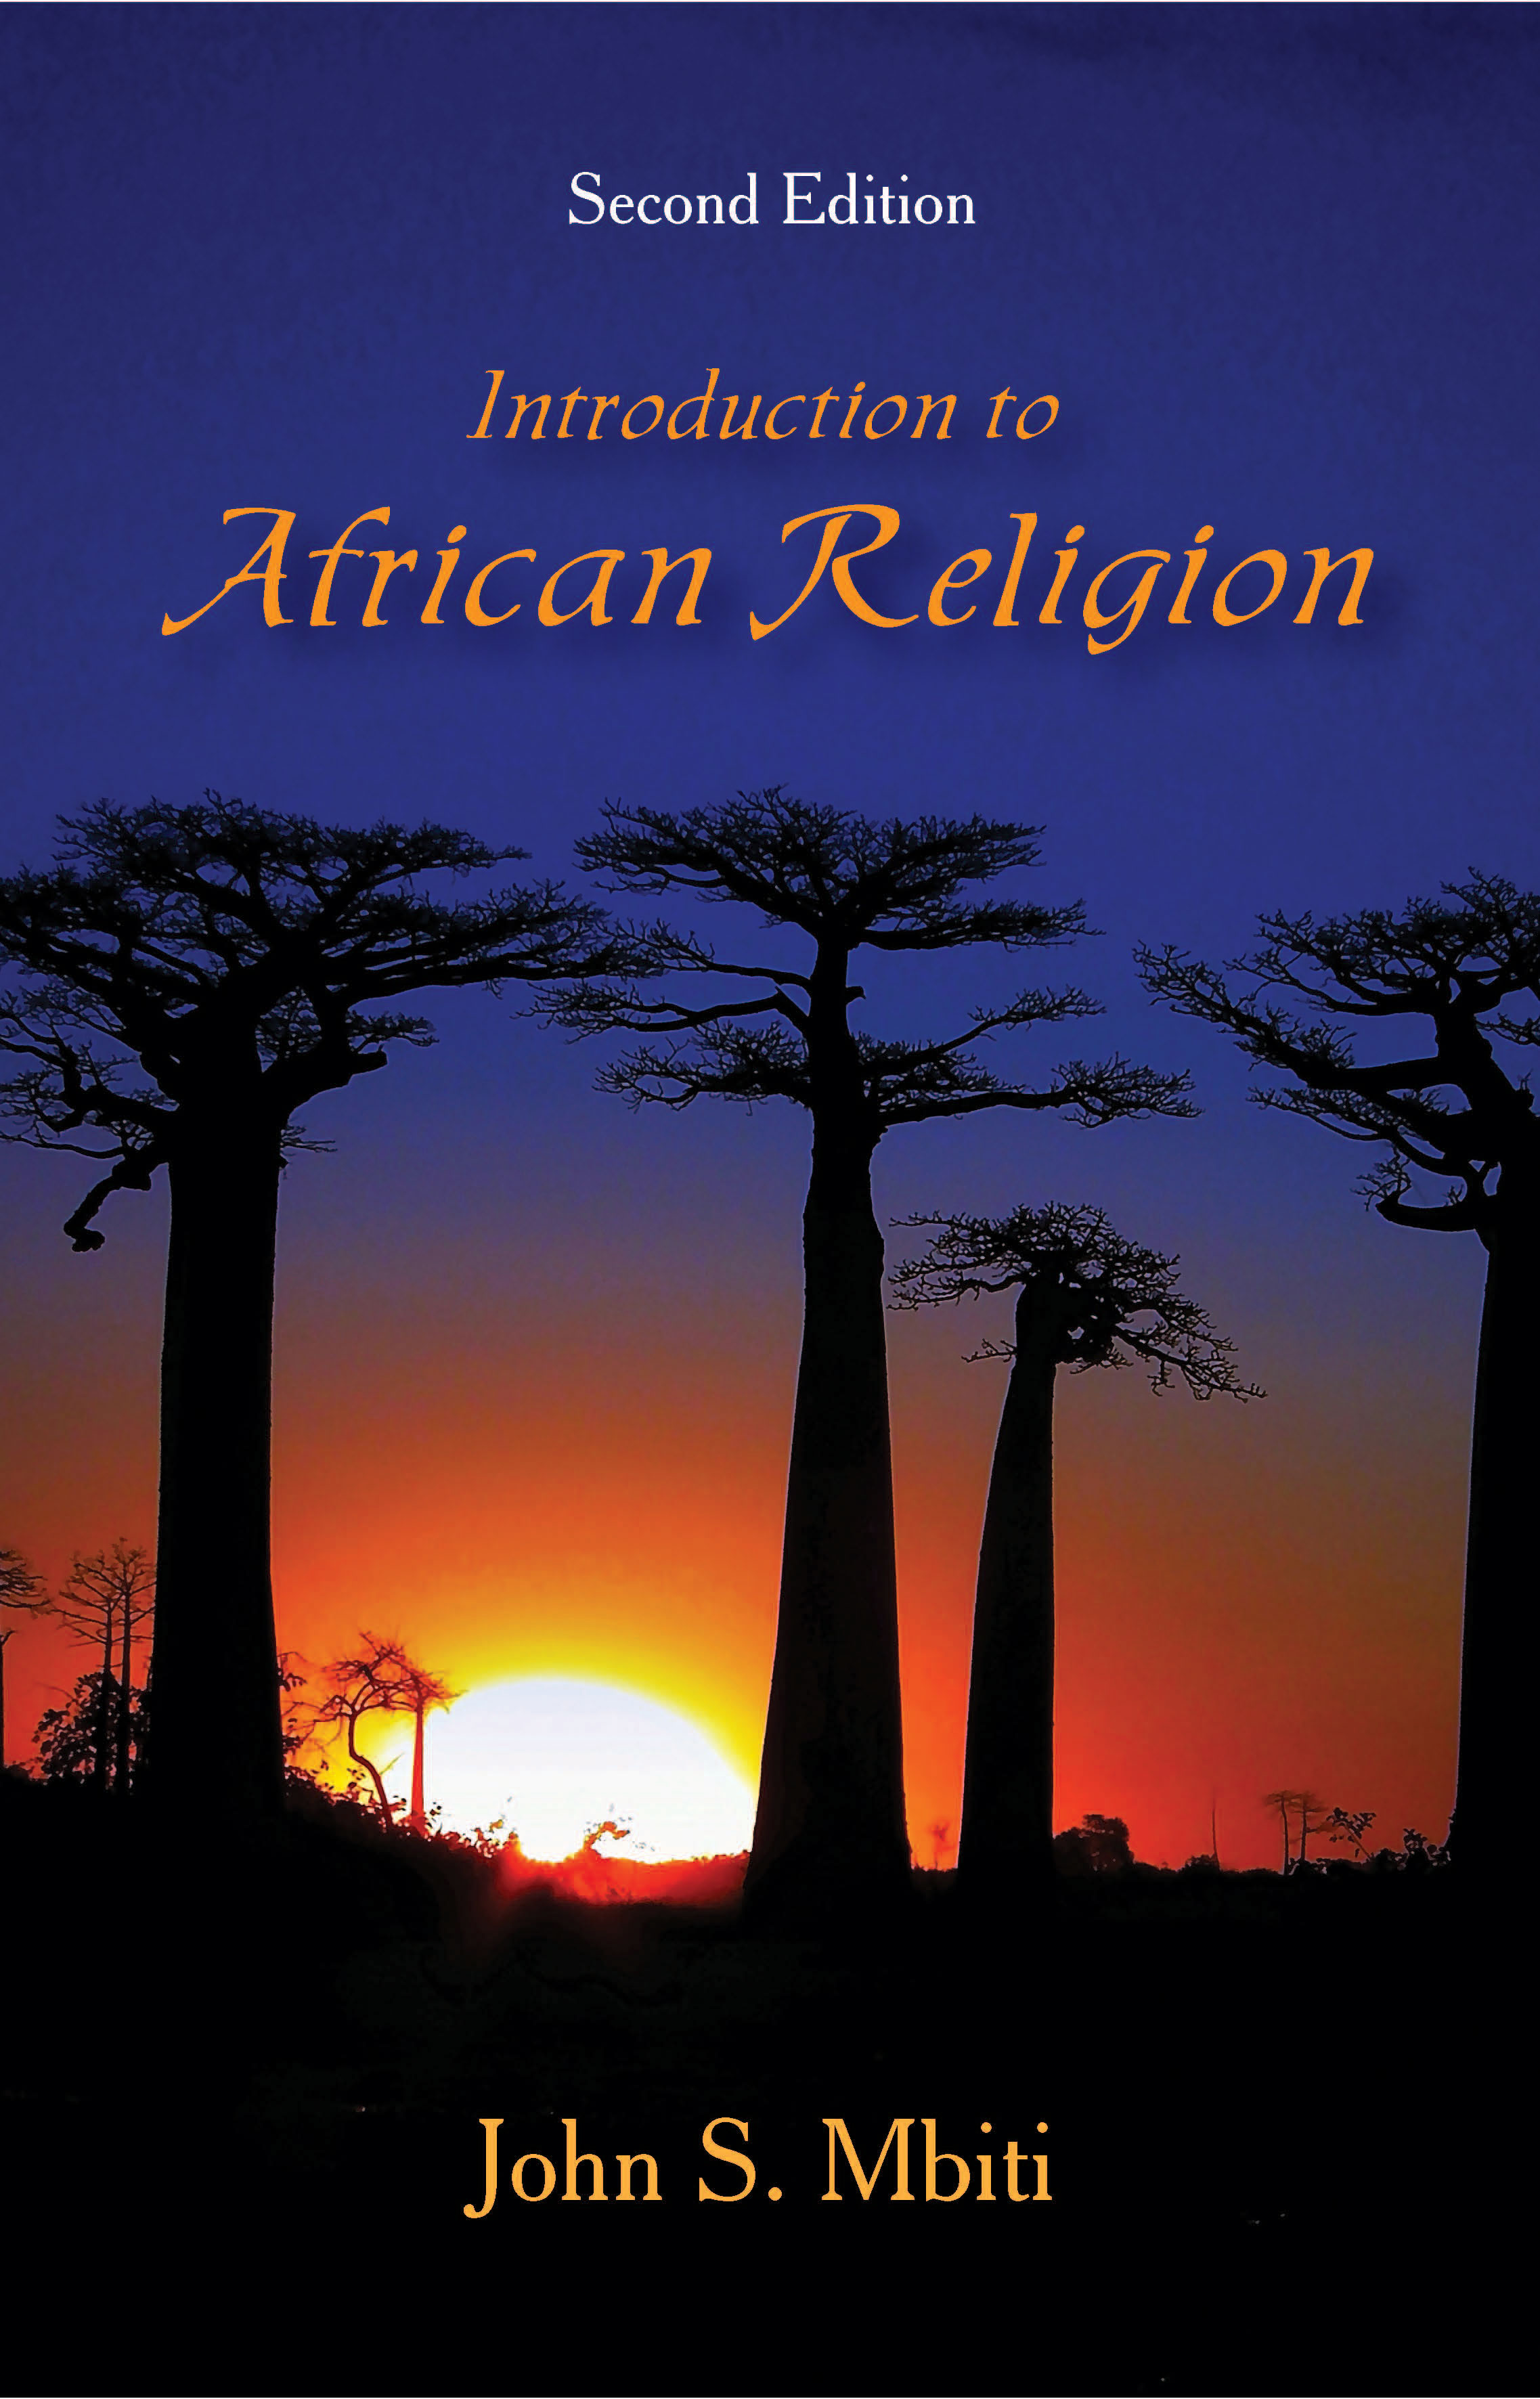 Introduction to African Religion:  by John S. Mbiti